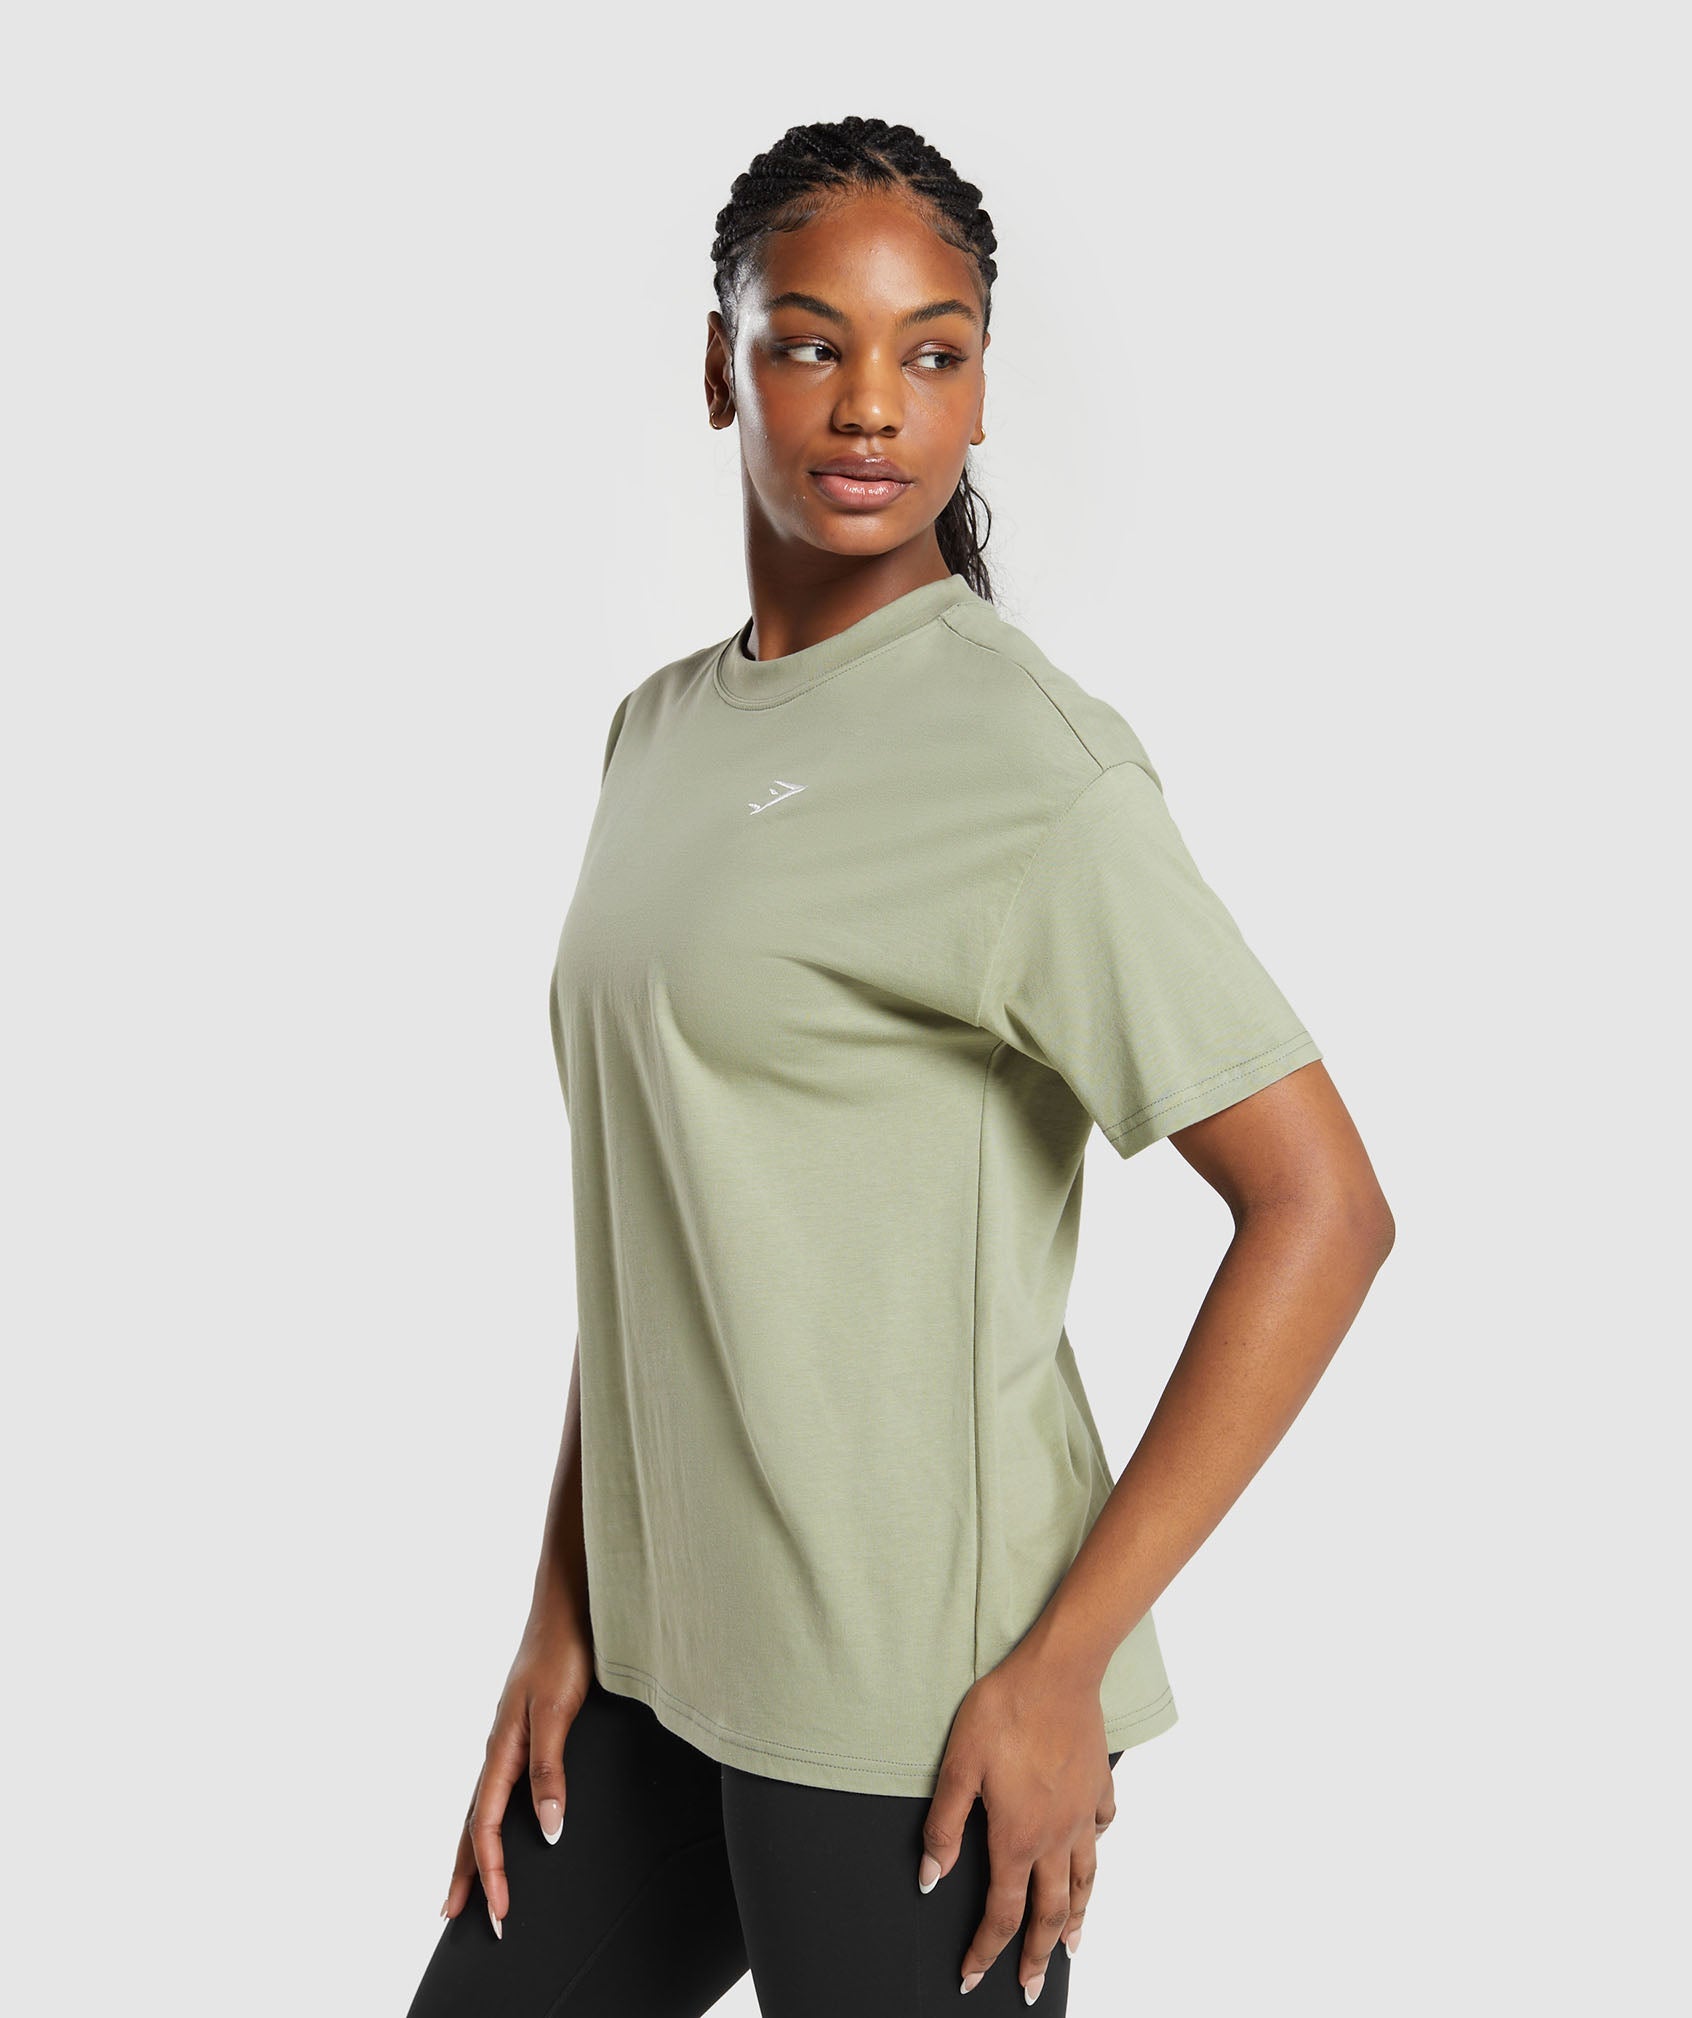 Training Oversized T-Shirt in Chalk Green - view 3